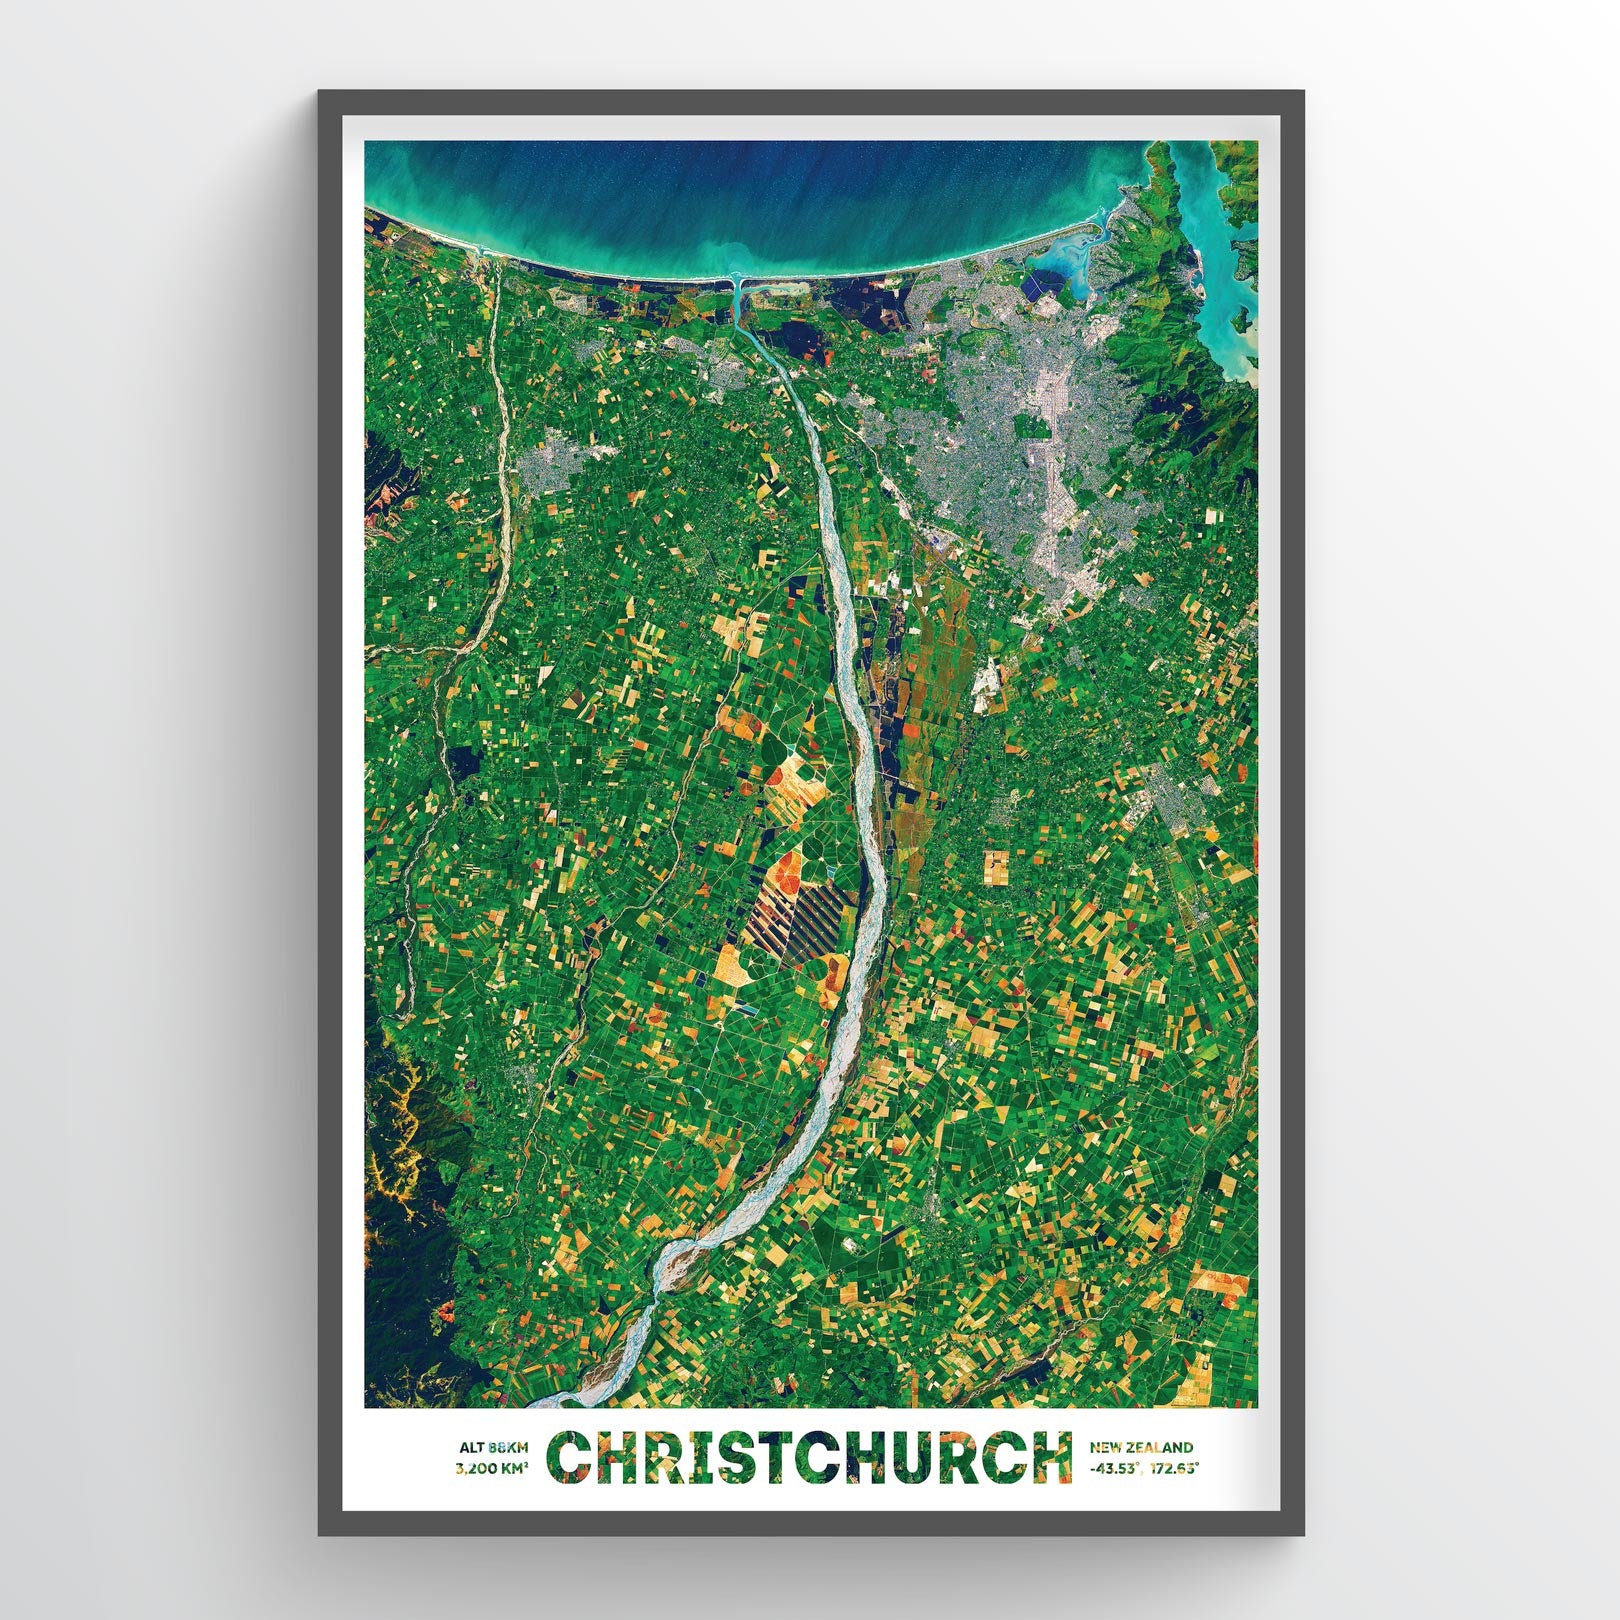 Christchurch Earth Photography - Art Print - Point Two Design